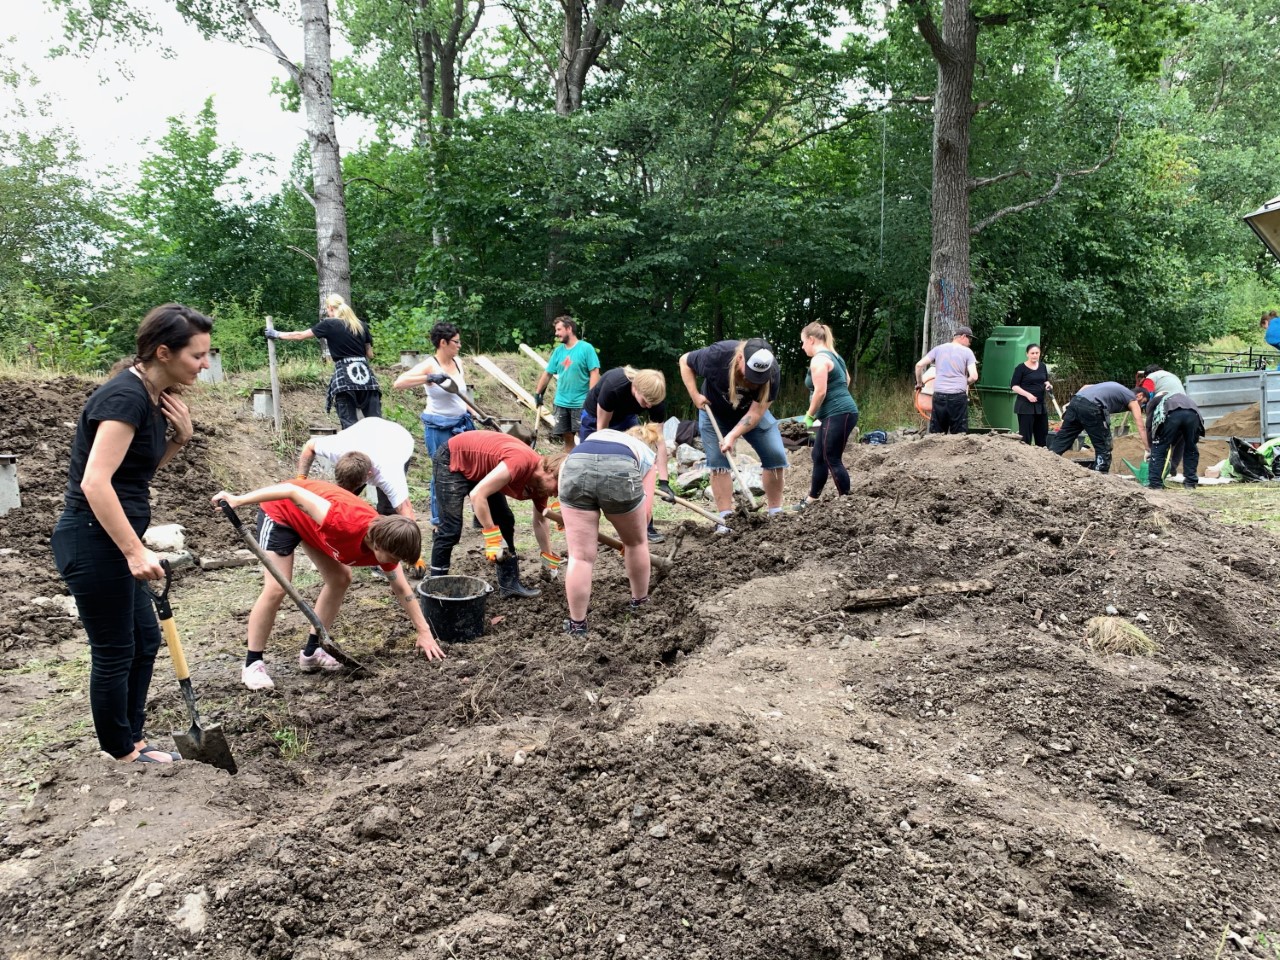 Group of people digging in the ground